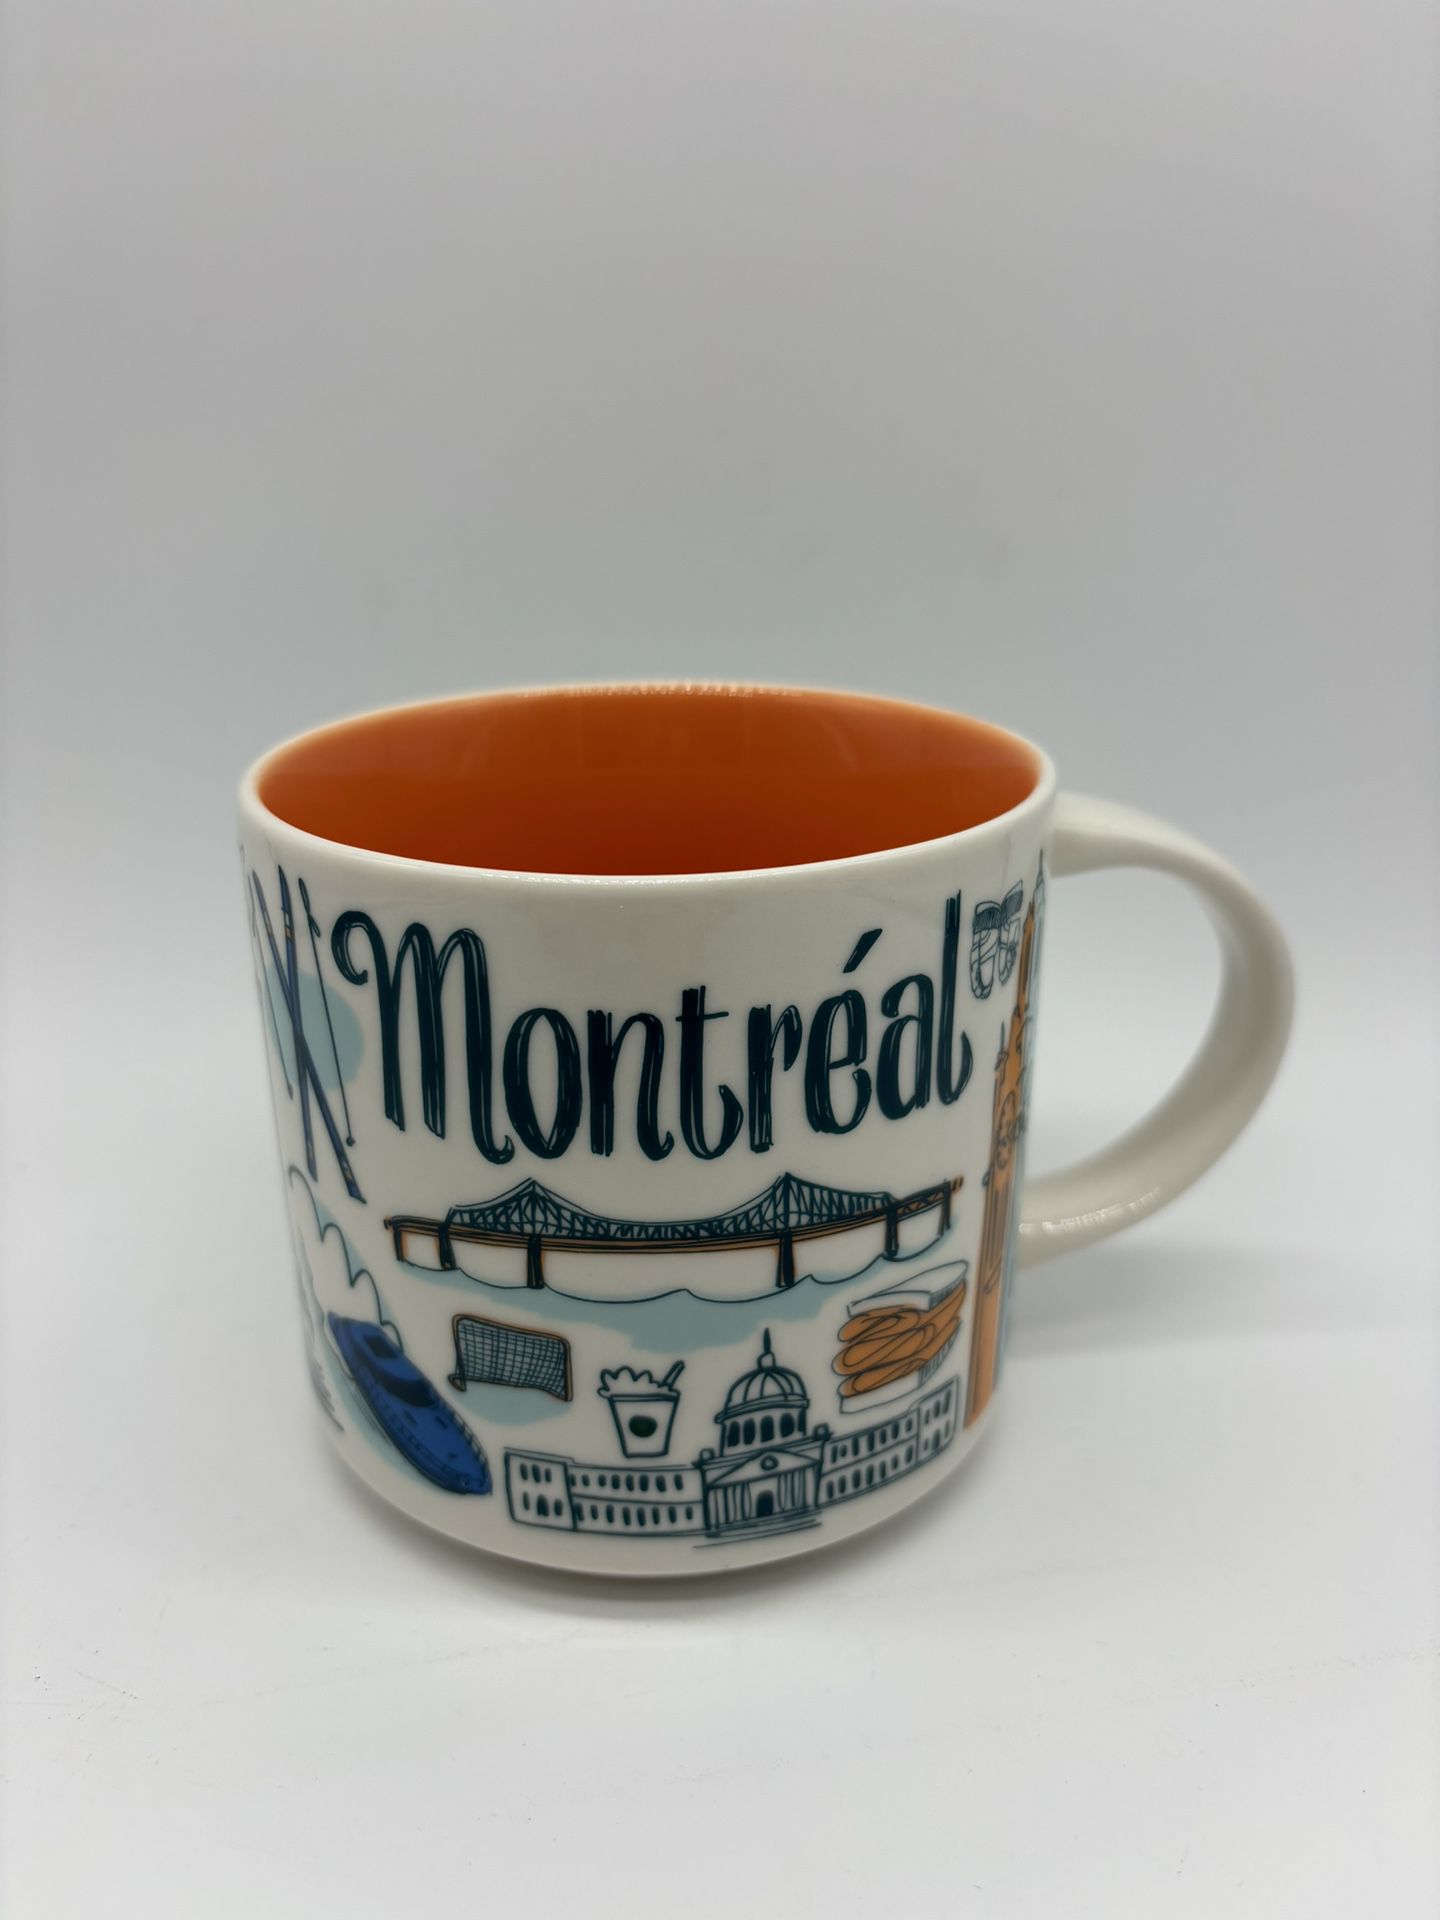 Starbucks 2018 Been There Series MONTREAL French Across the Globe Collection Mug